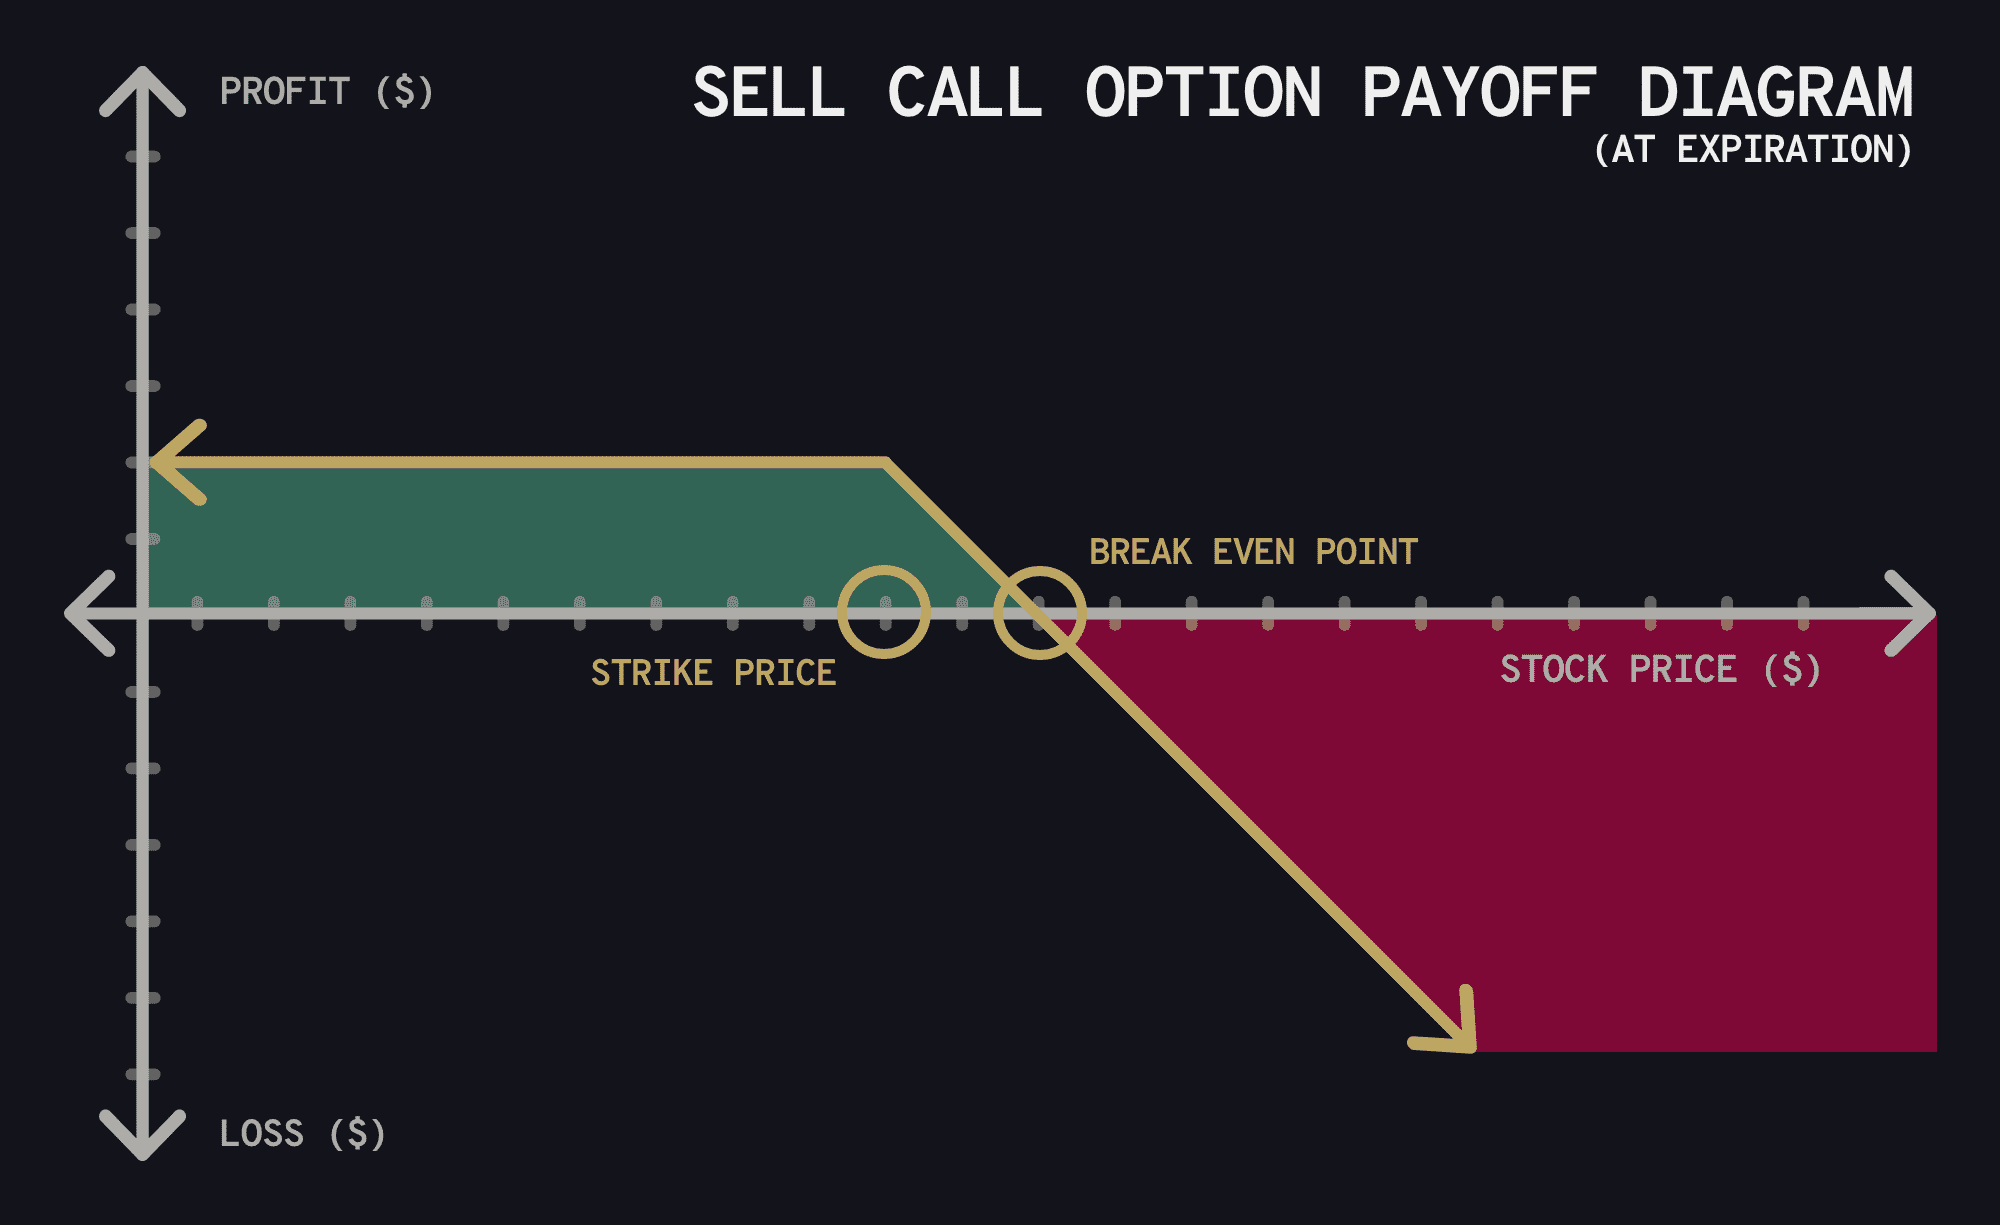 Payoff diagrams for buying and selling call and put option contracts